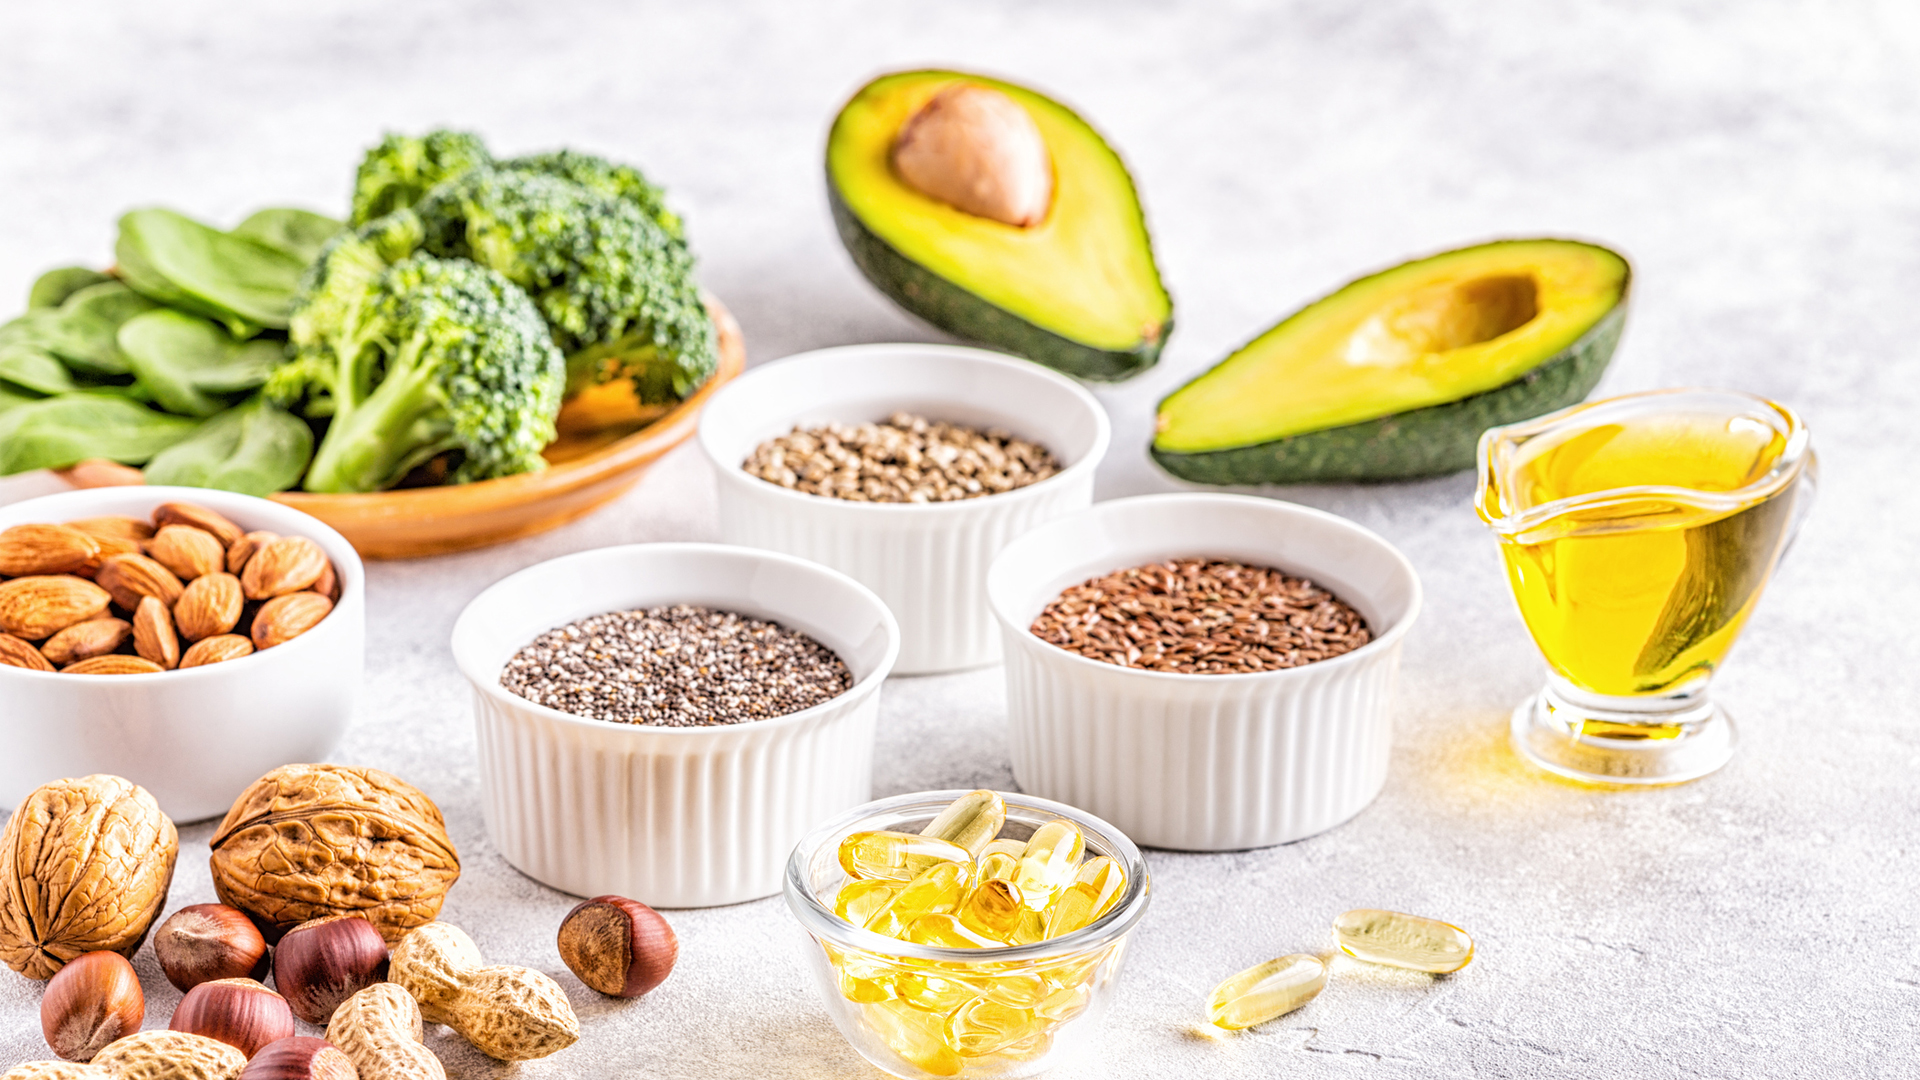 healthy sources of unsaturated fats like olive oil, nuts, seeds, and avocado